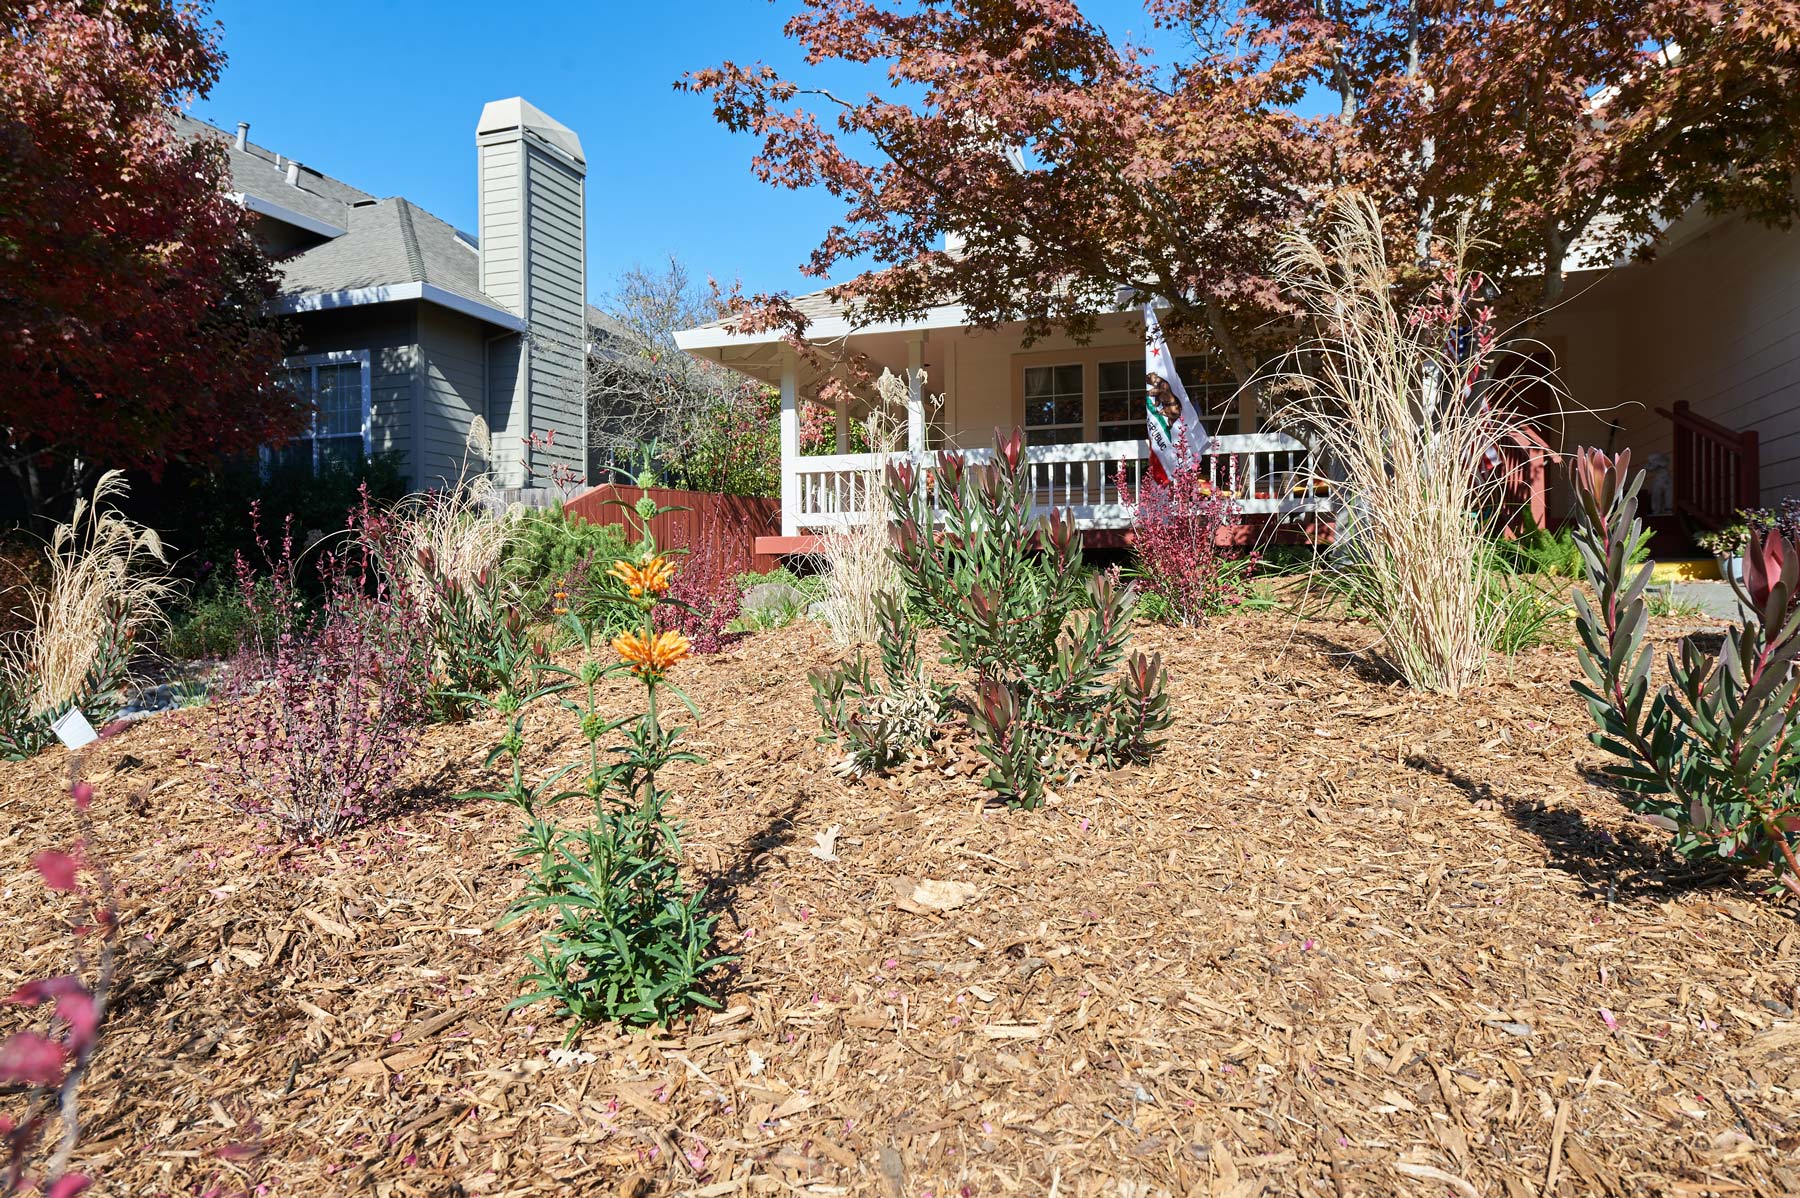 Landscaping Contractor in Sonoma County CA | Northview Landscaping